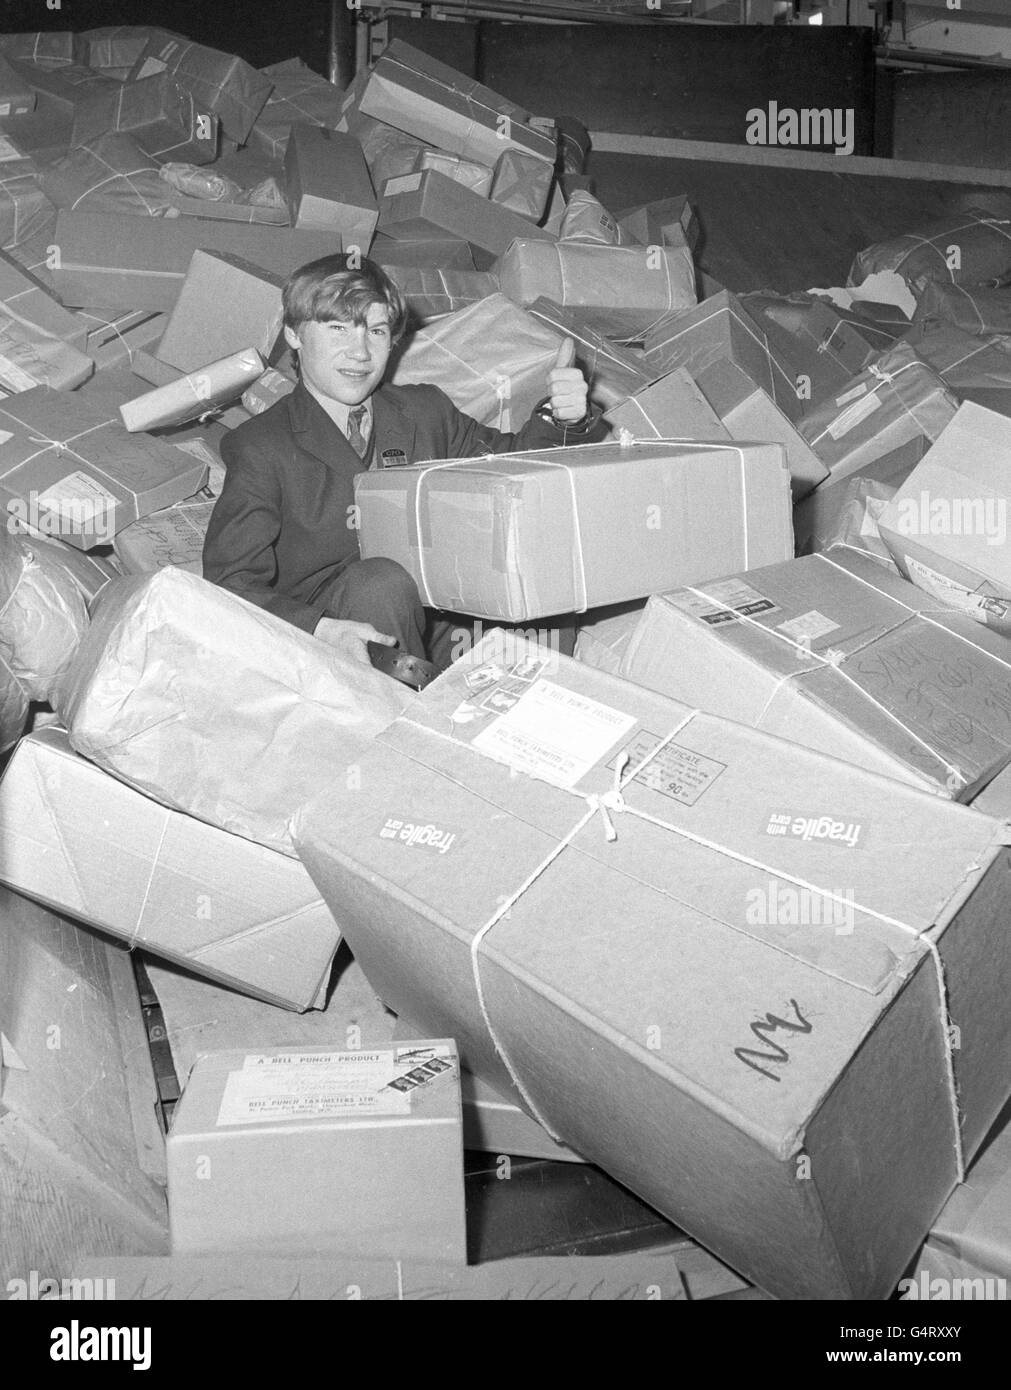 7 per week. As a beginner his job is to deliver telegrams. He is pictured here at London's Western District Office Stock Photo